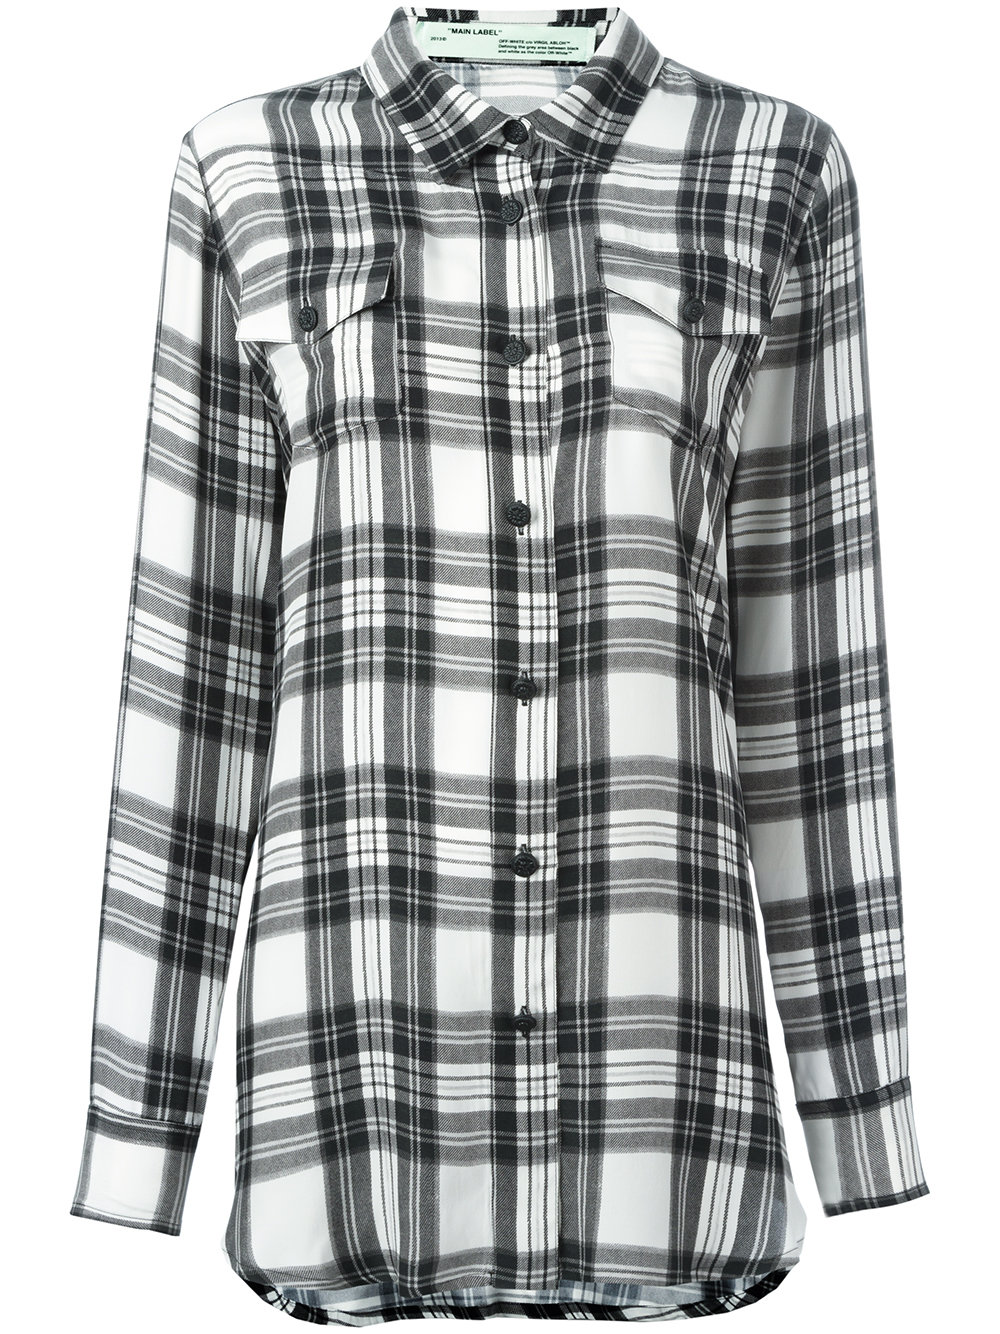 Off-White plaid shirt popular WHITE ALL OVER Women Clothing Shirts